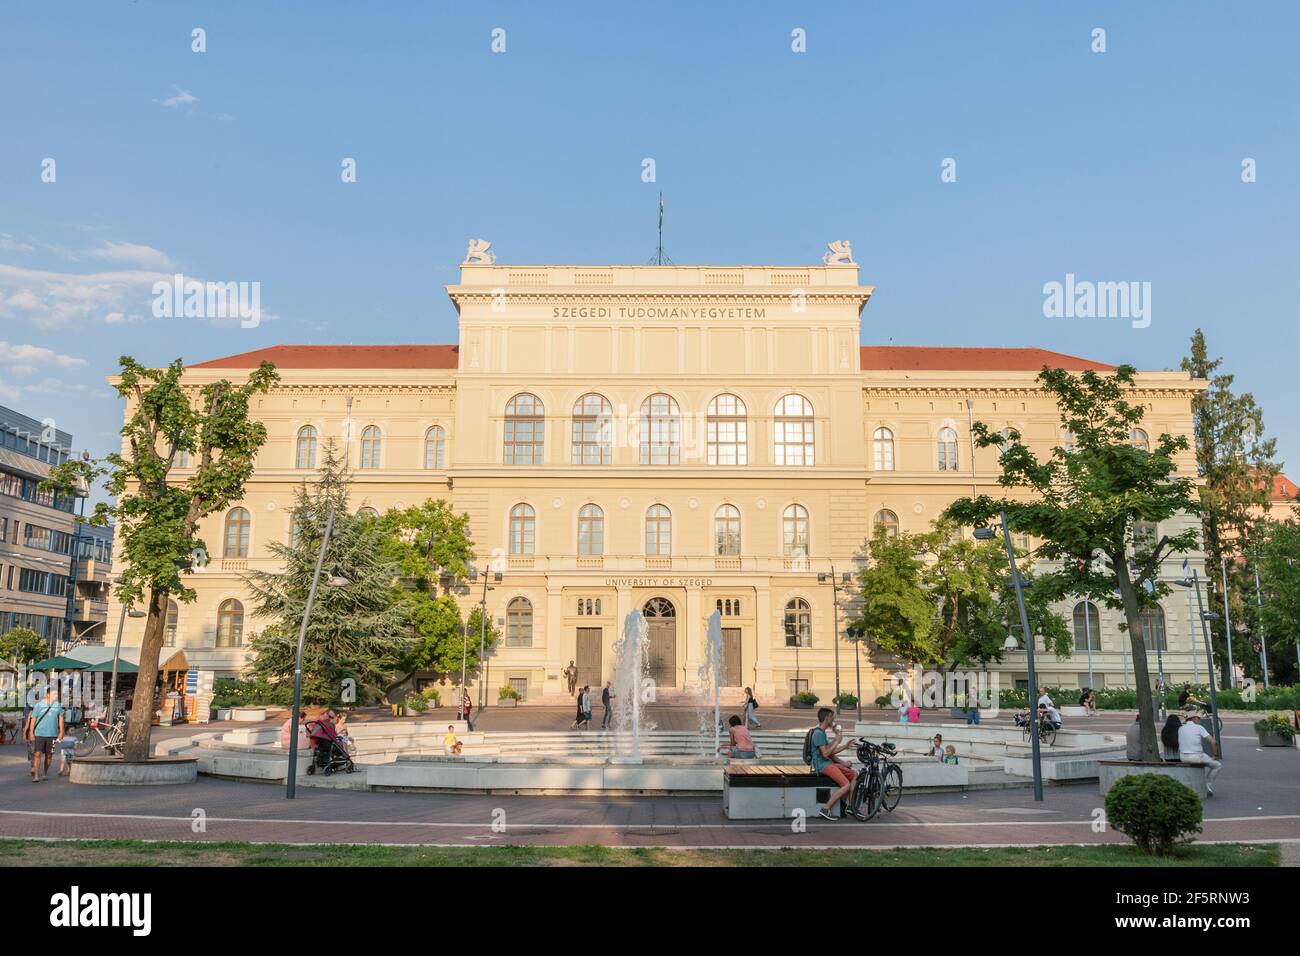 SZEGED, HUNGARY - JULY 20, 2017: Main facade of Szeged University, on the Dugonics Ter Square, with the iconic Fountain with people sitting behind. Th Stock Photo